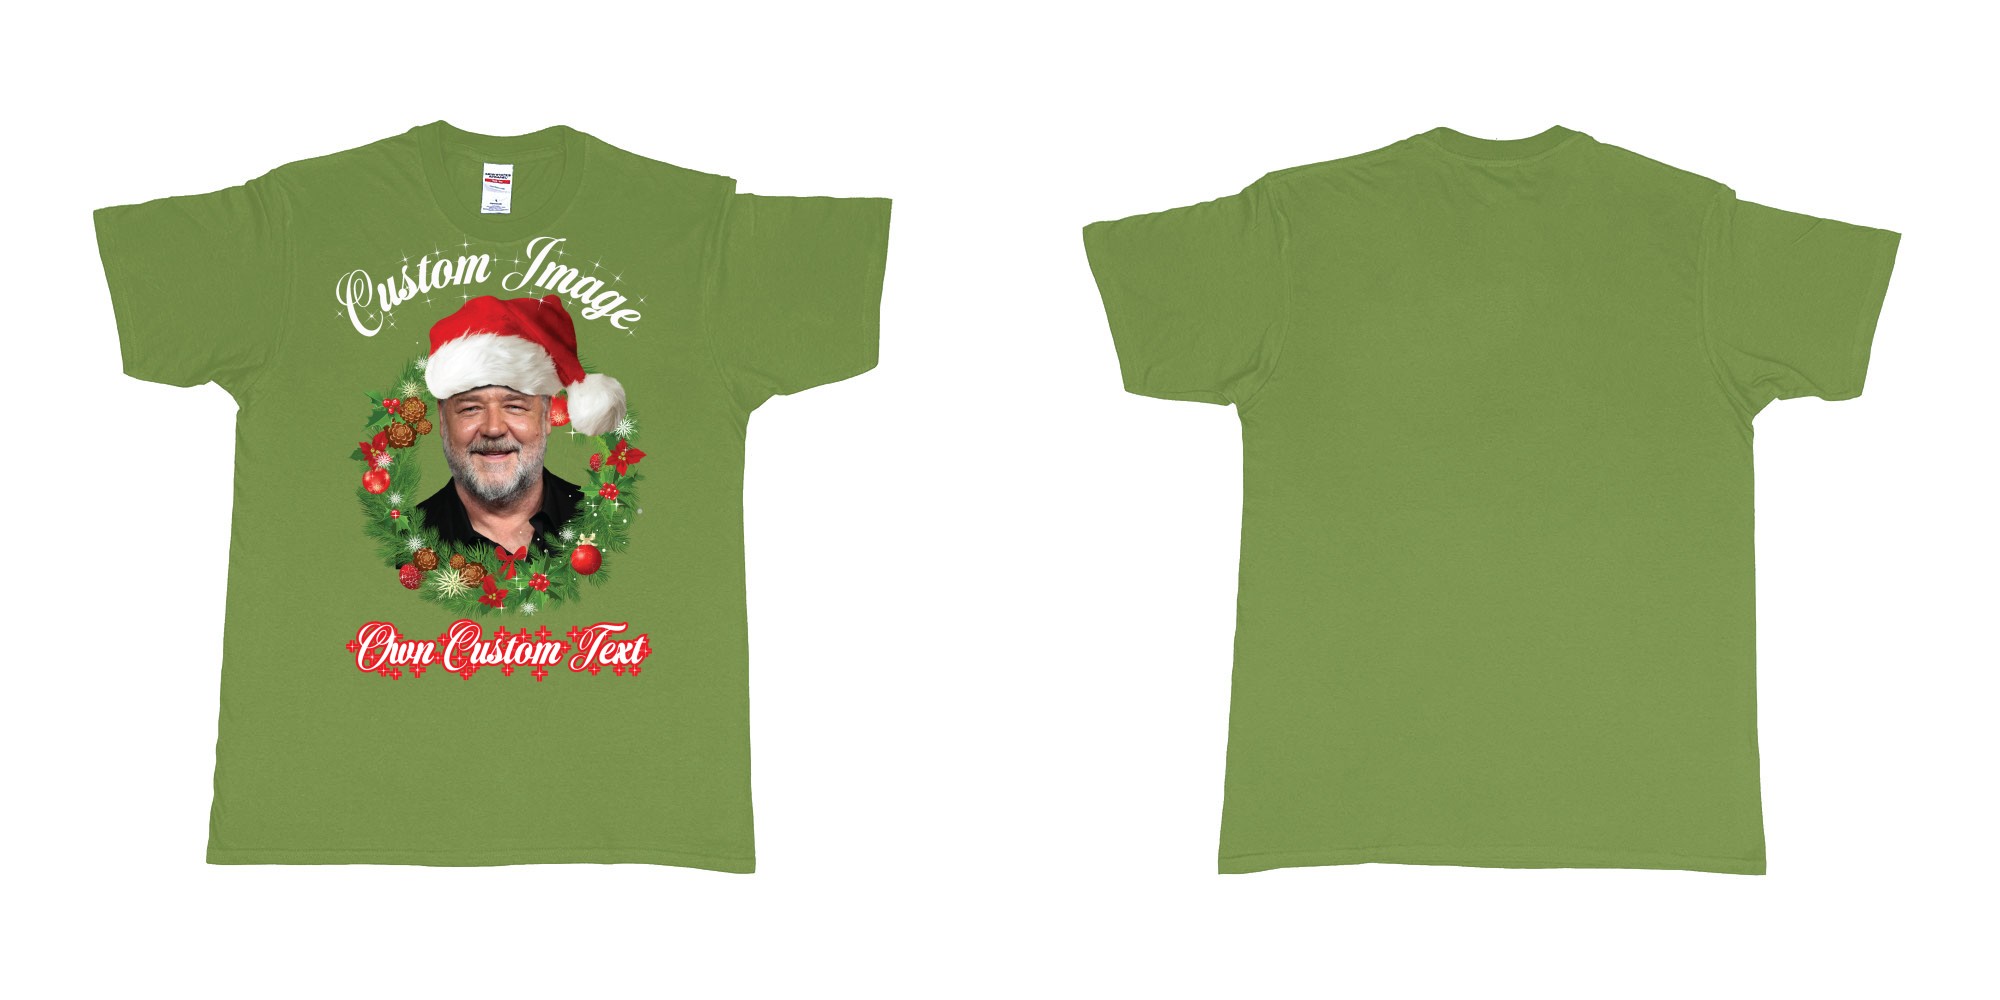 Custom tshirt design christmas wreath custom face image text in fabric color military-green choice your own text made in Bali by The Pirate Way